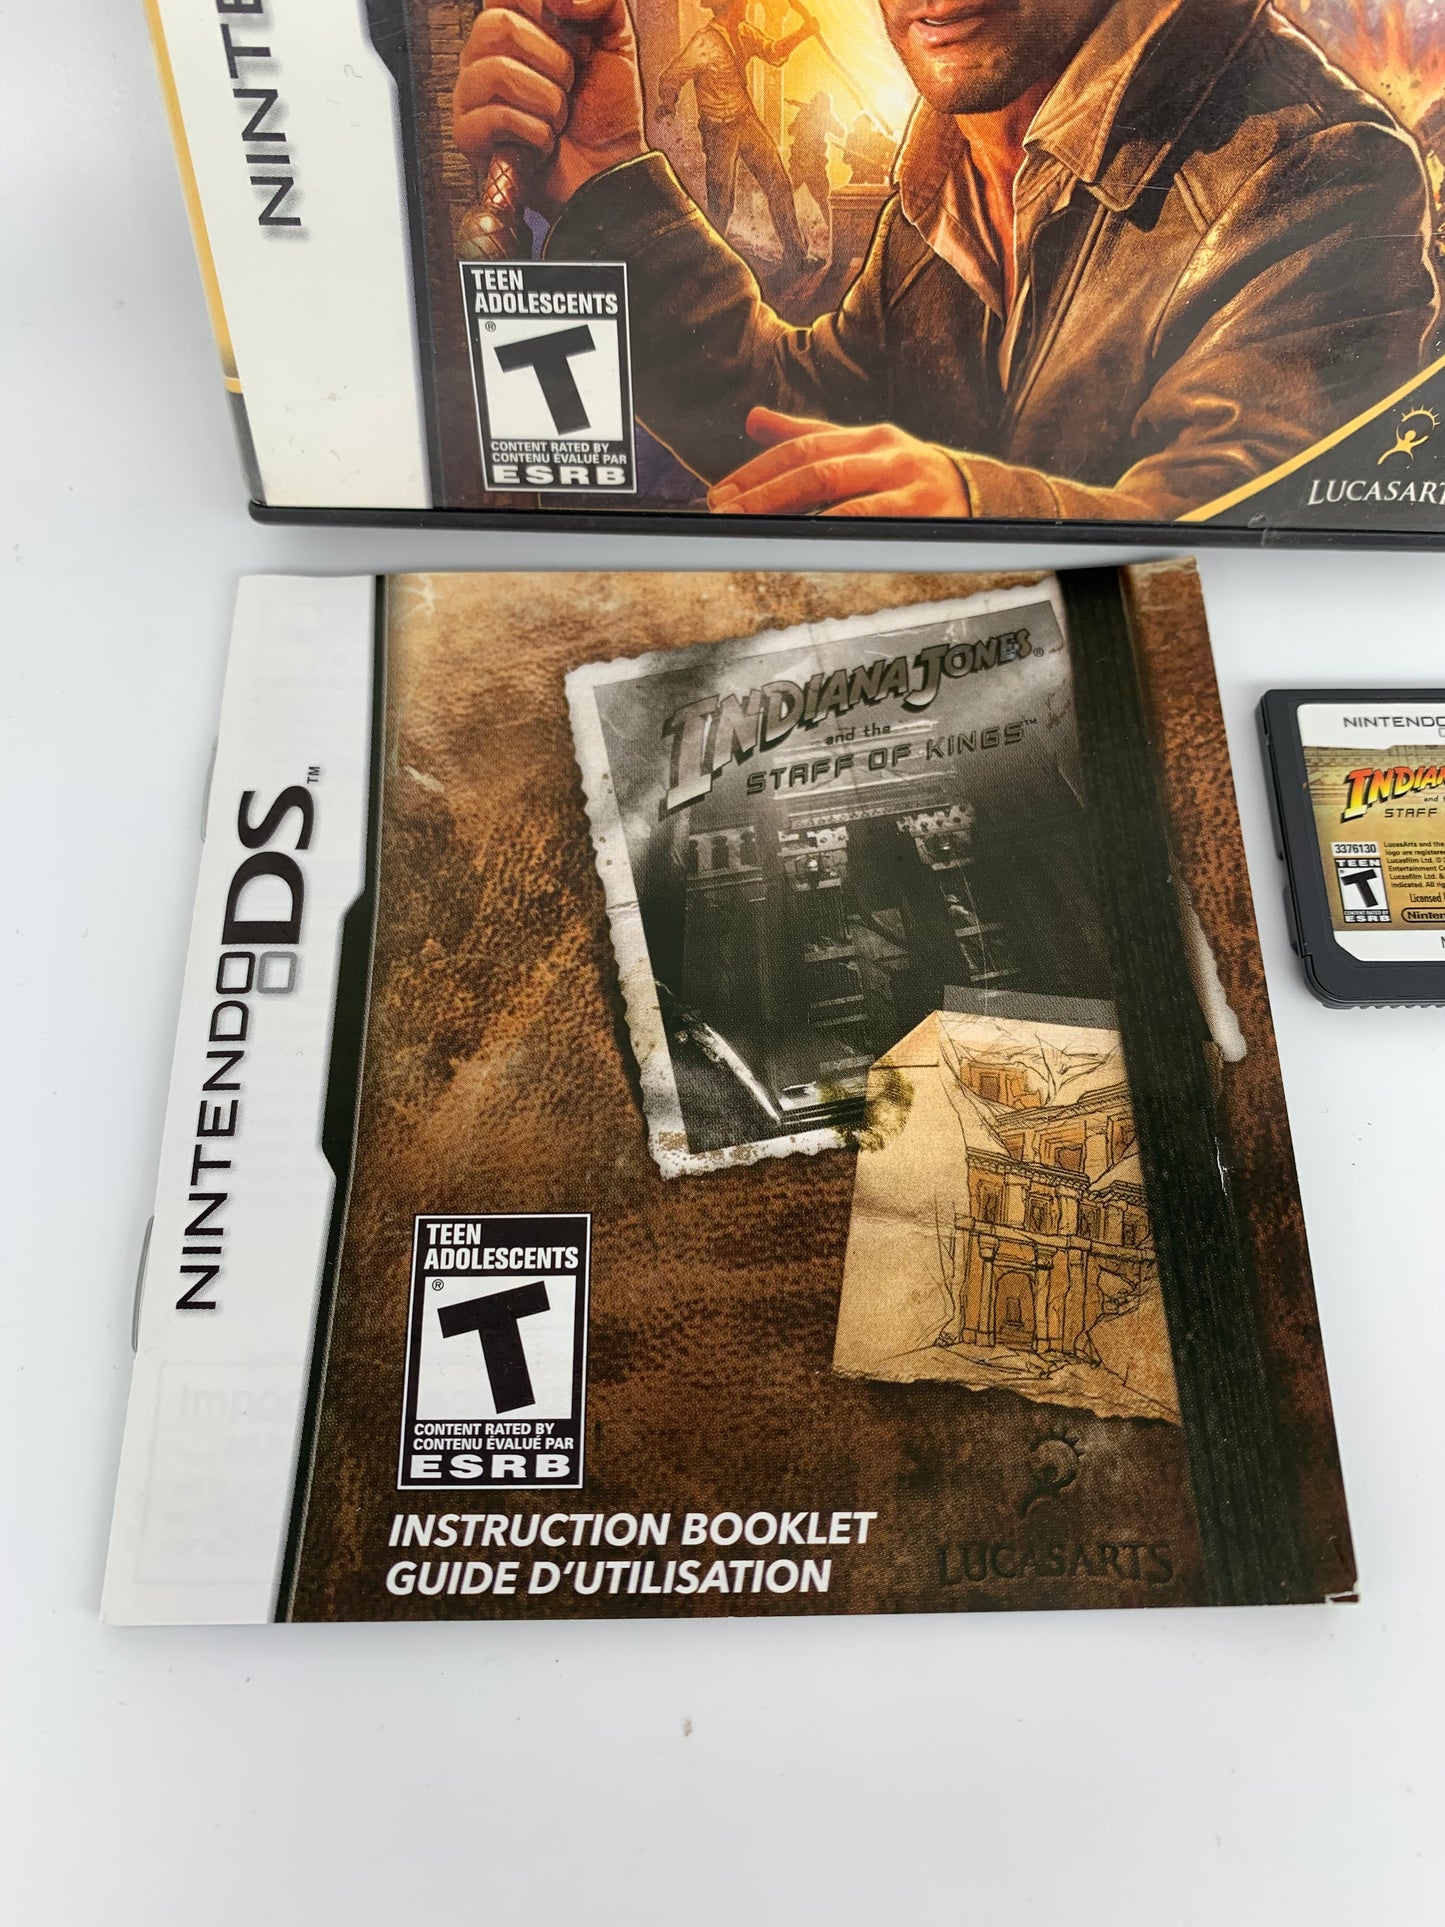 NiNTENDO DS | iNDiANA JONES AND THE STAFF OF KiNGS